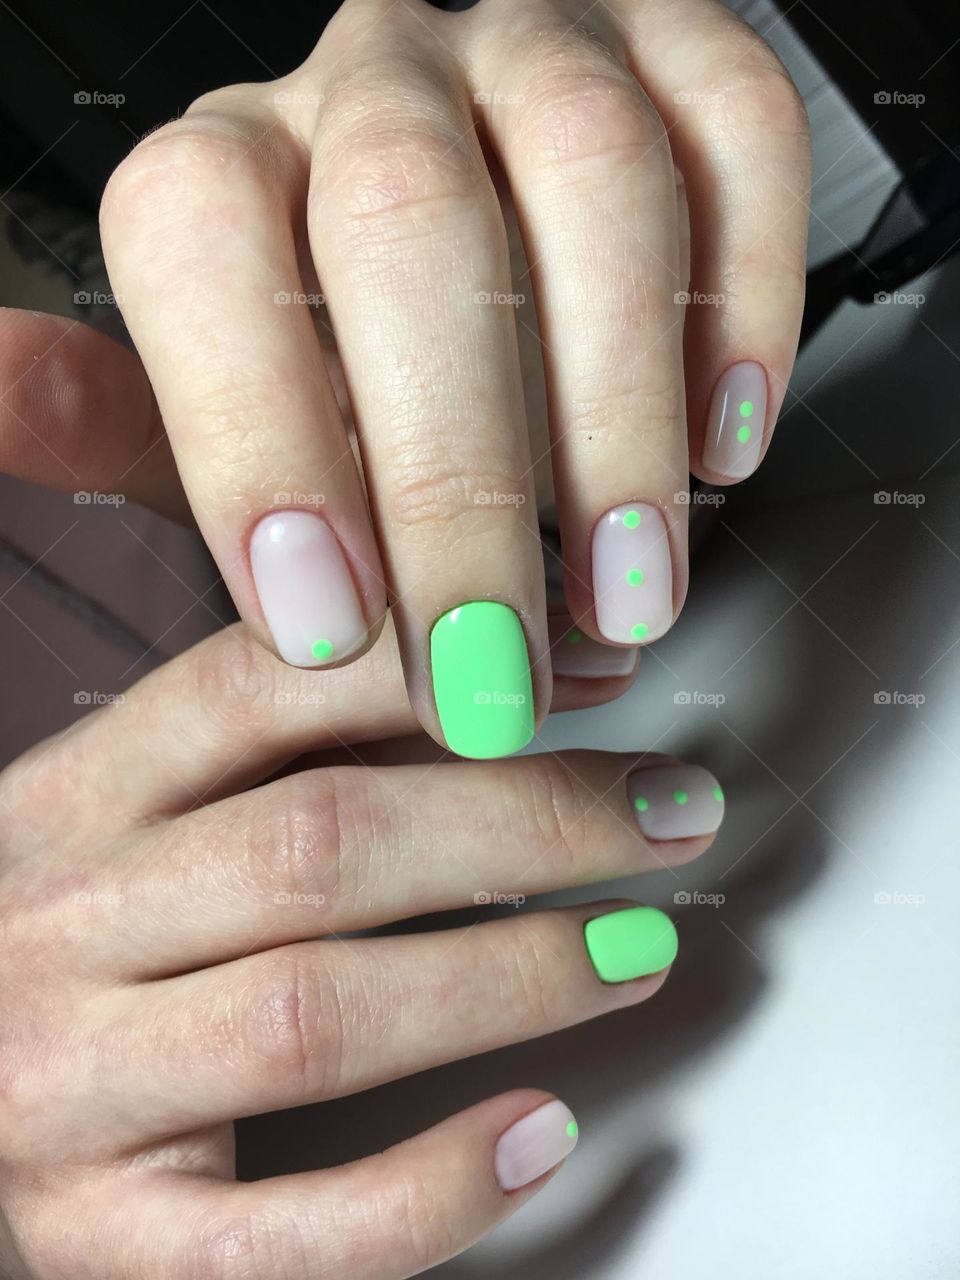 Painted nails, gel polish on nails, women's beautiful and neat manicure